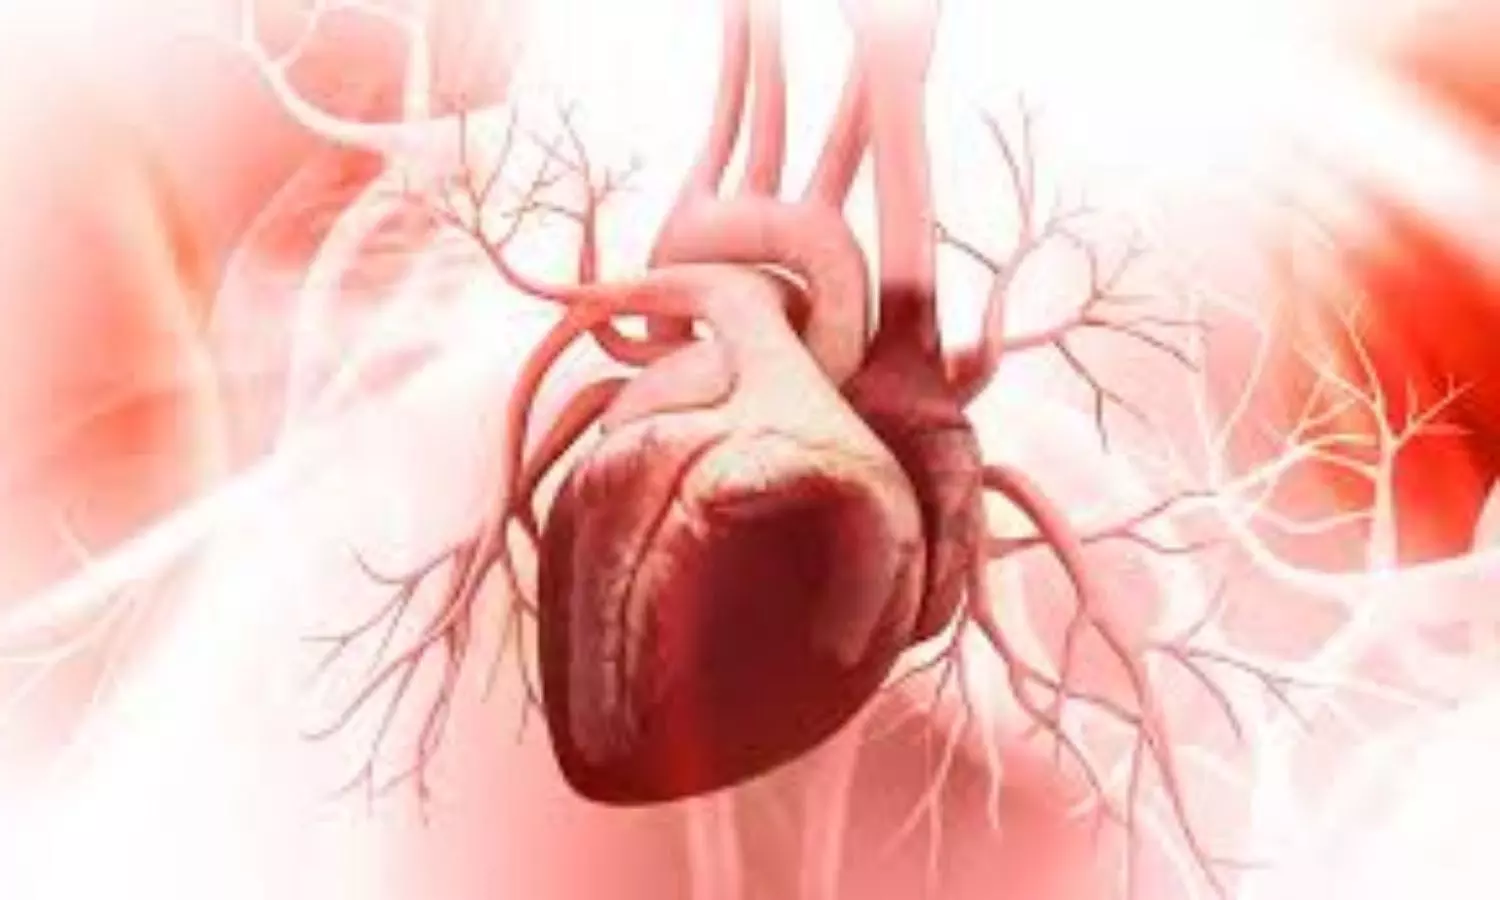 Stress CMR-inducible MI and LGE may predict MACE in HFpEF patients without CAD: Study